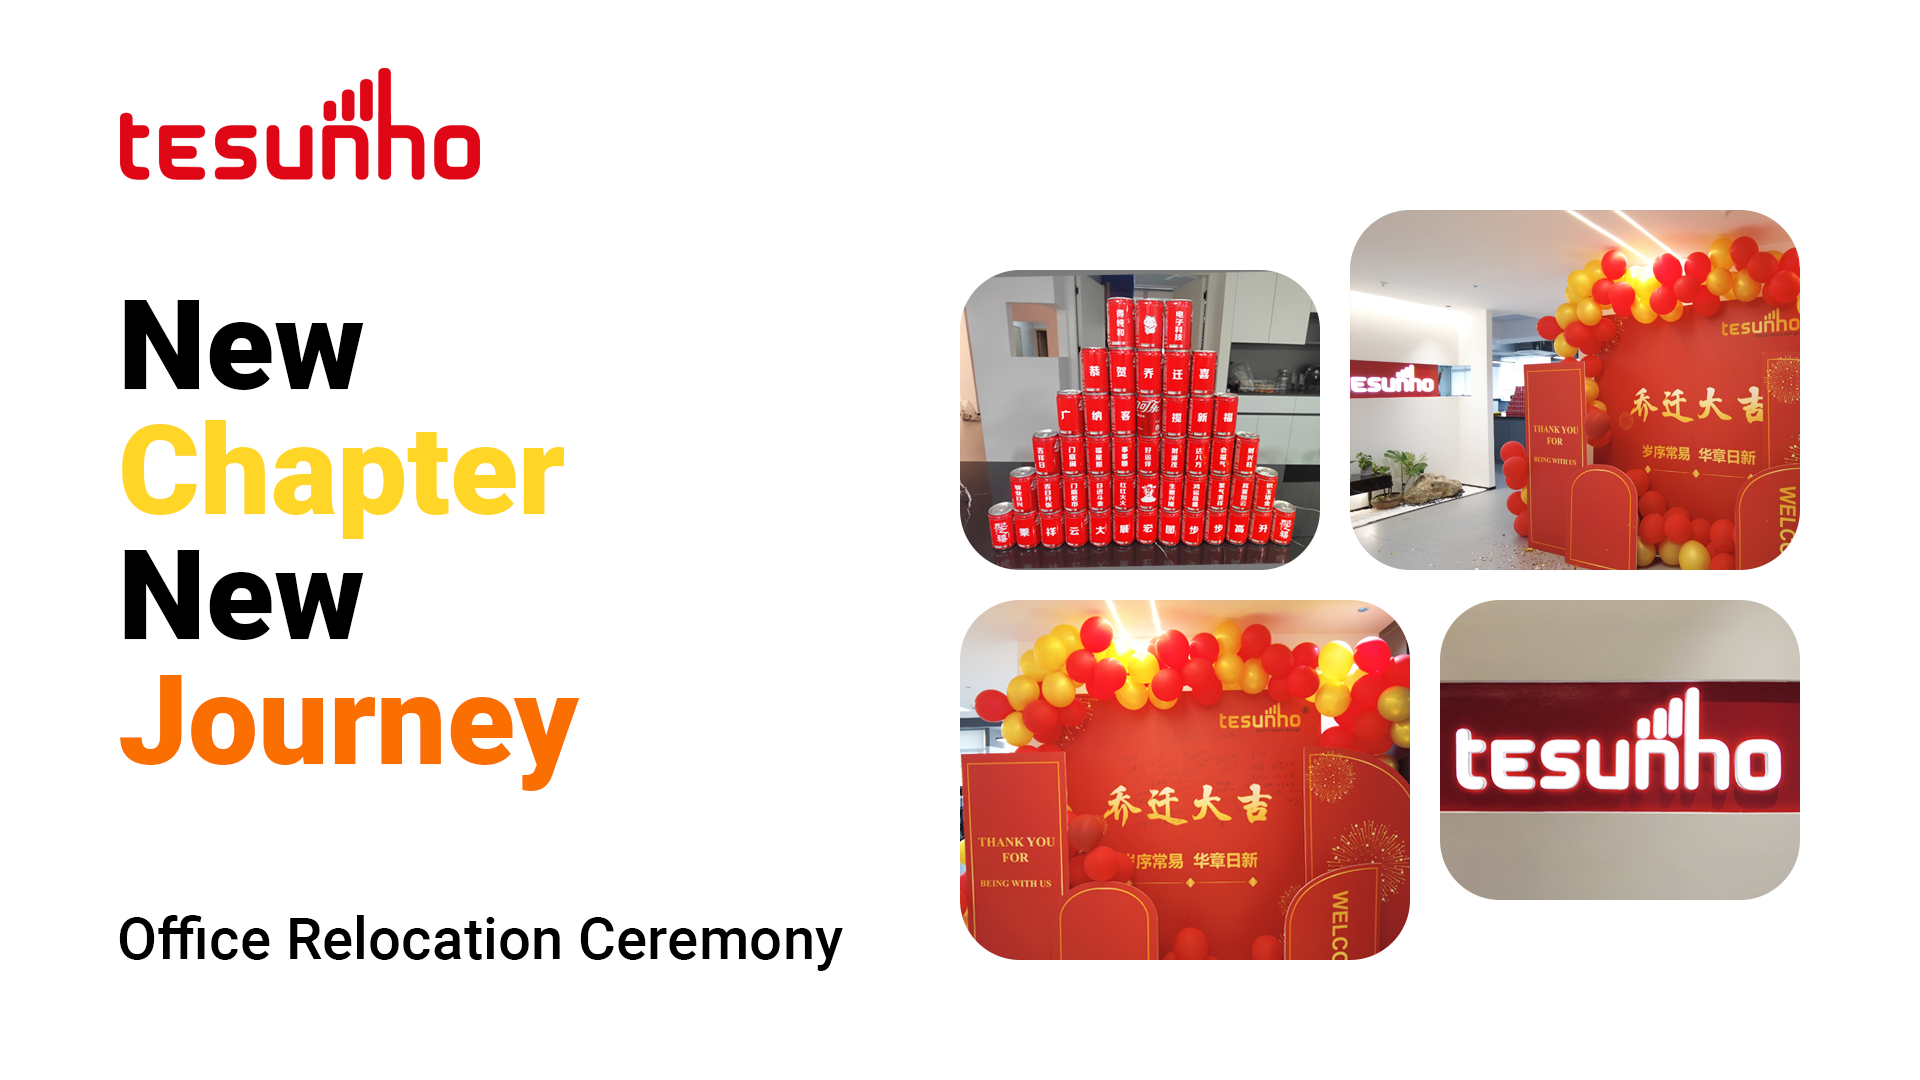 Tesunho Office Relocation Ceremony: New Chapter, New Journey